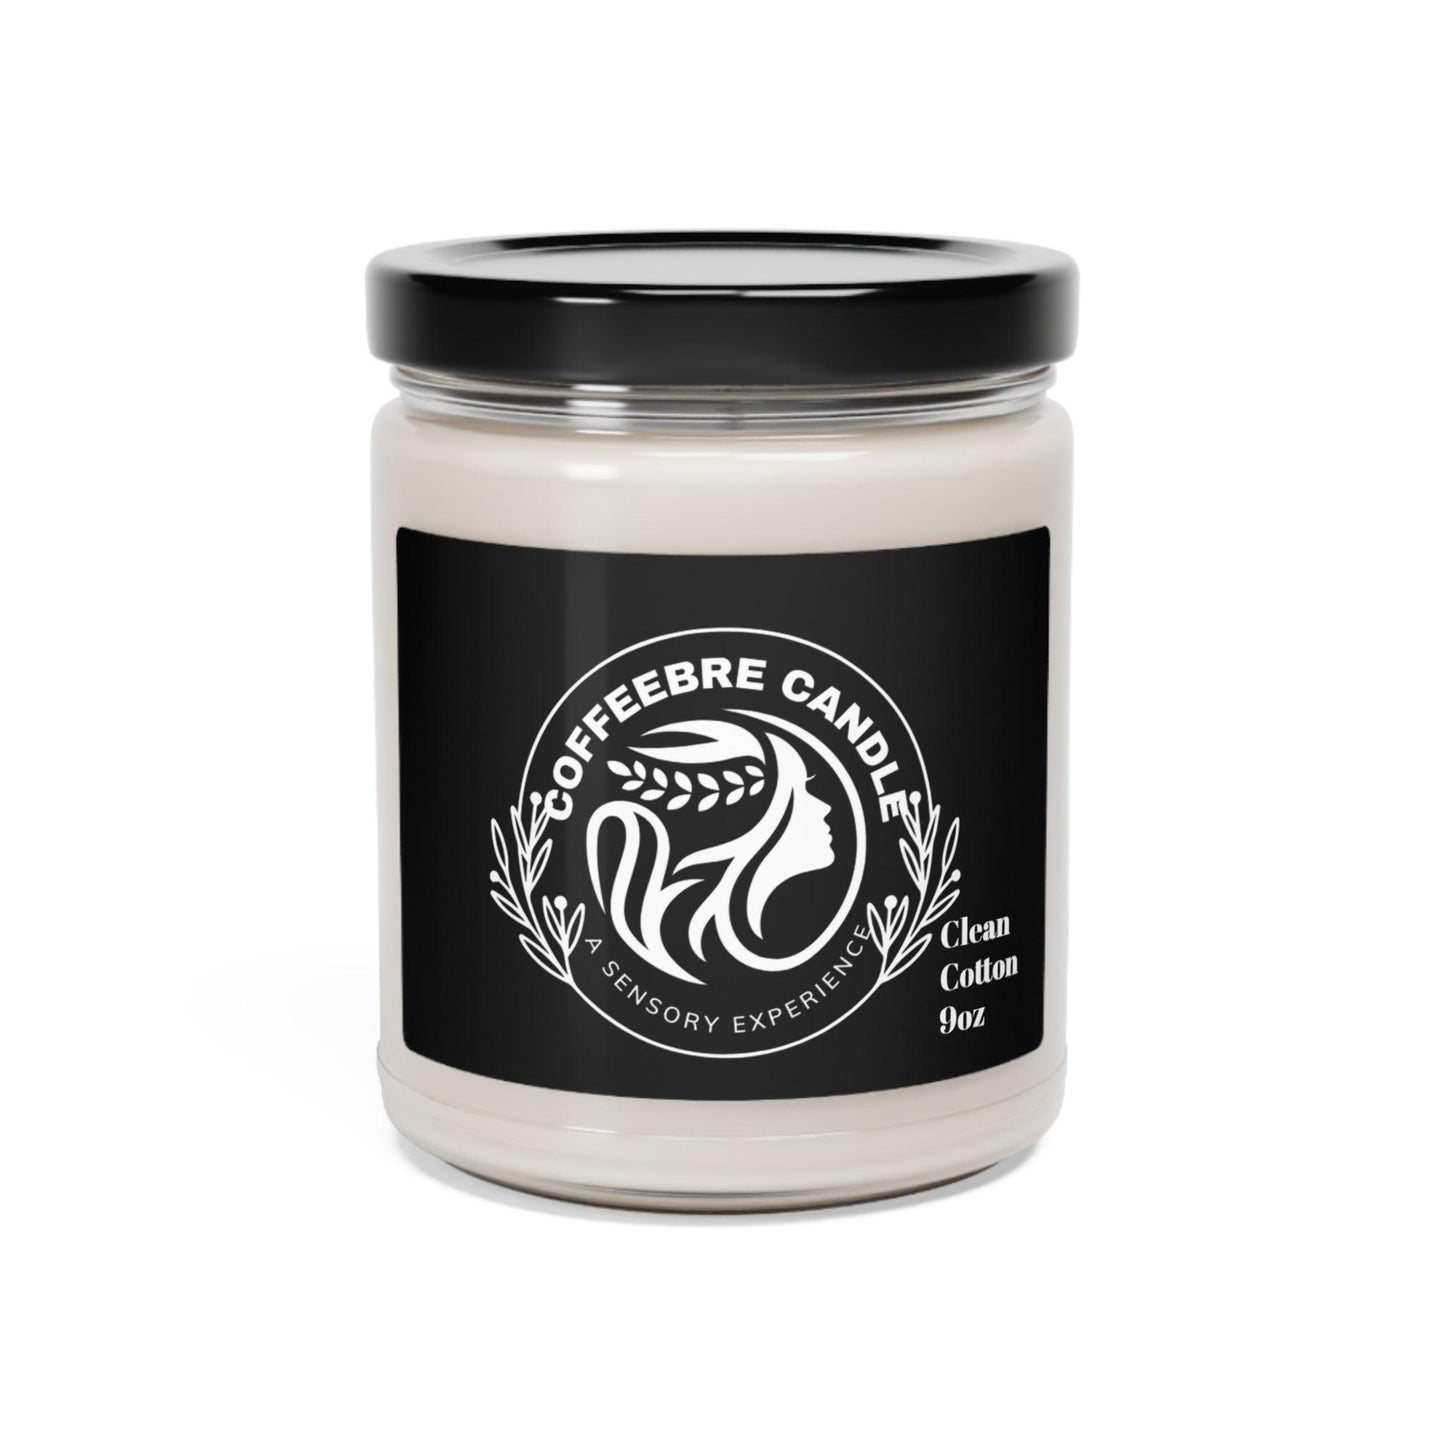 Coffeebre Luxury Clean Cotton Scented Soy Candle, 9oz - COFFEEBRE